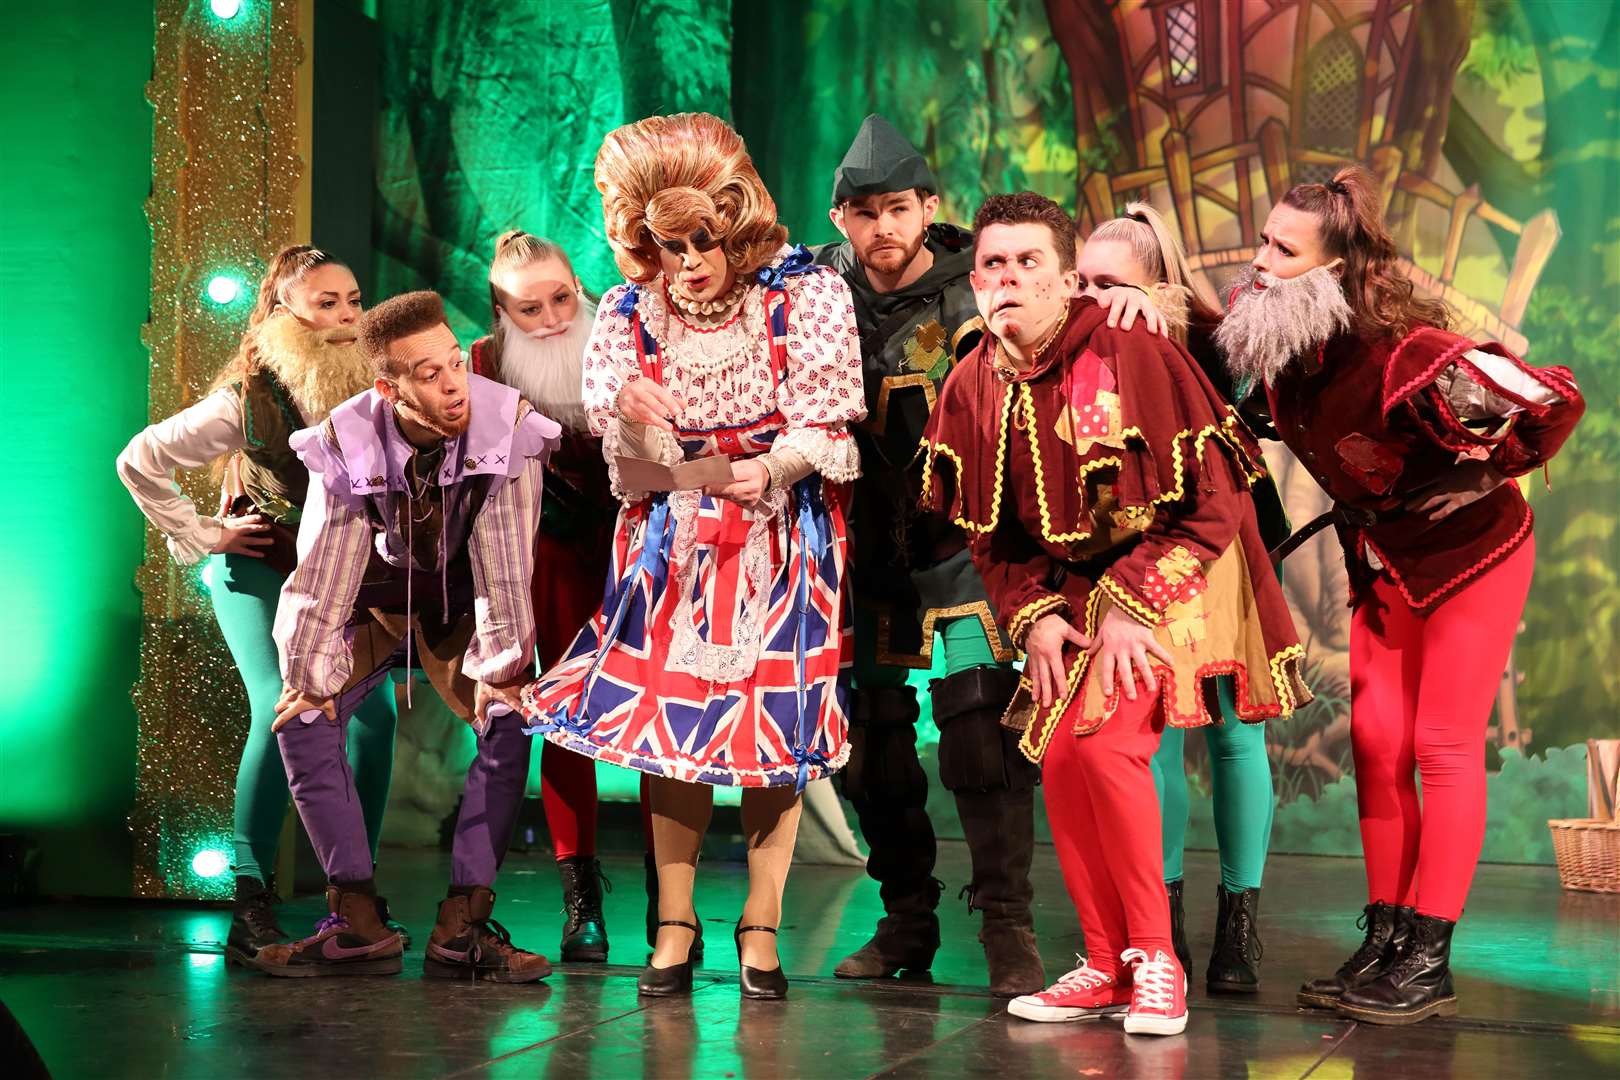 The cast of Robin Hood at The Woodville, Gravesend